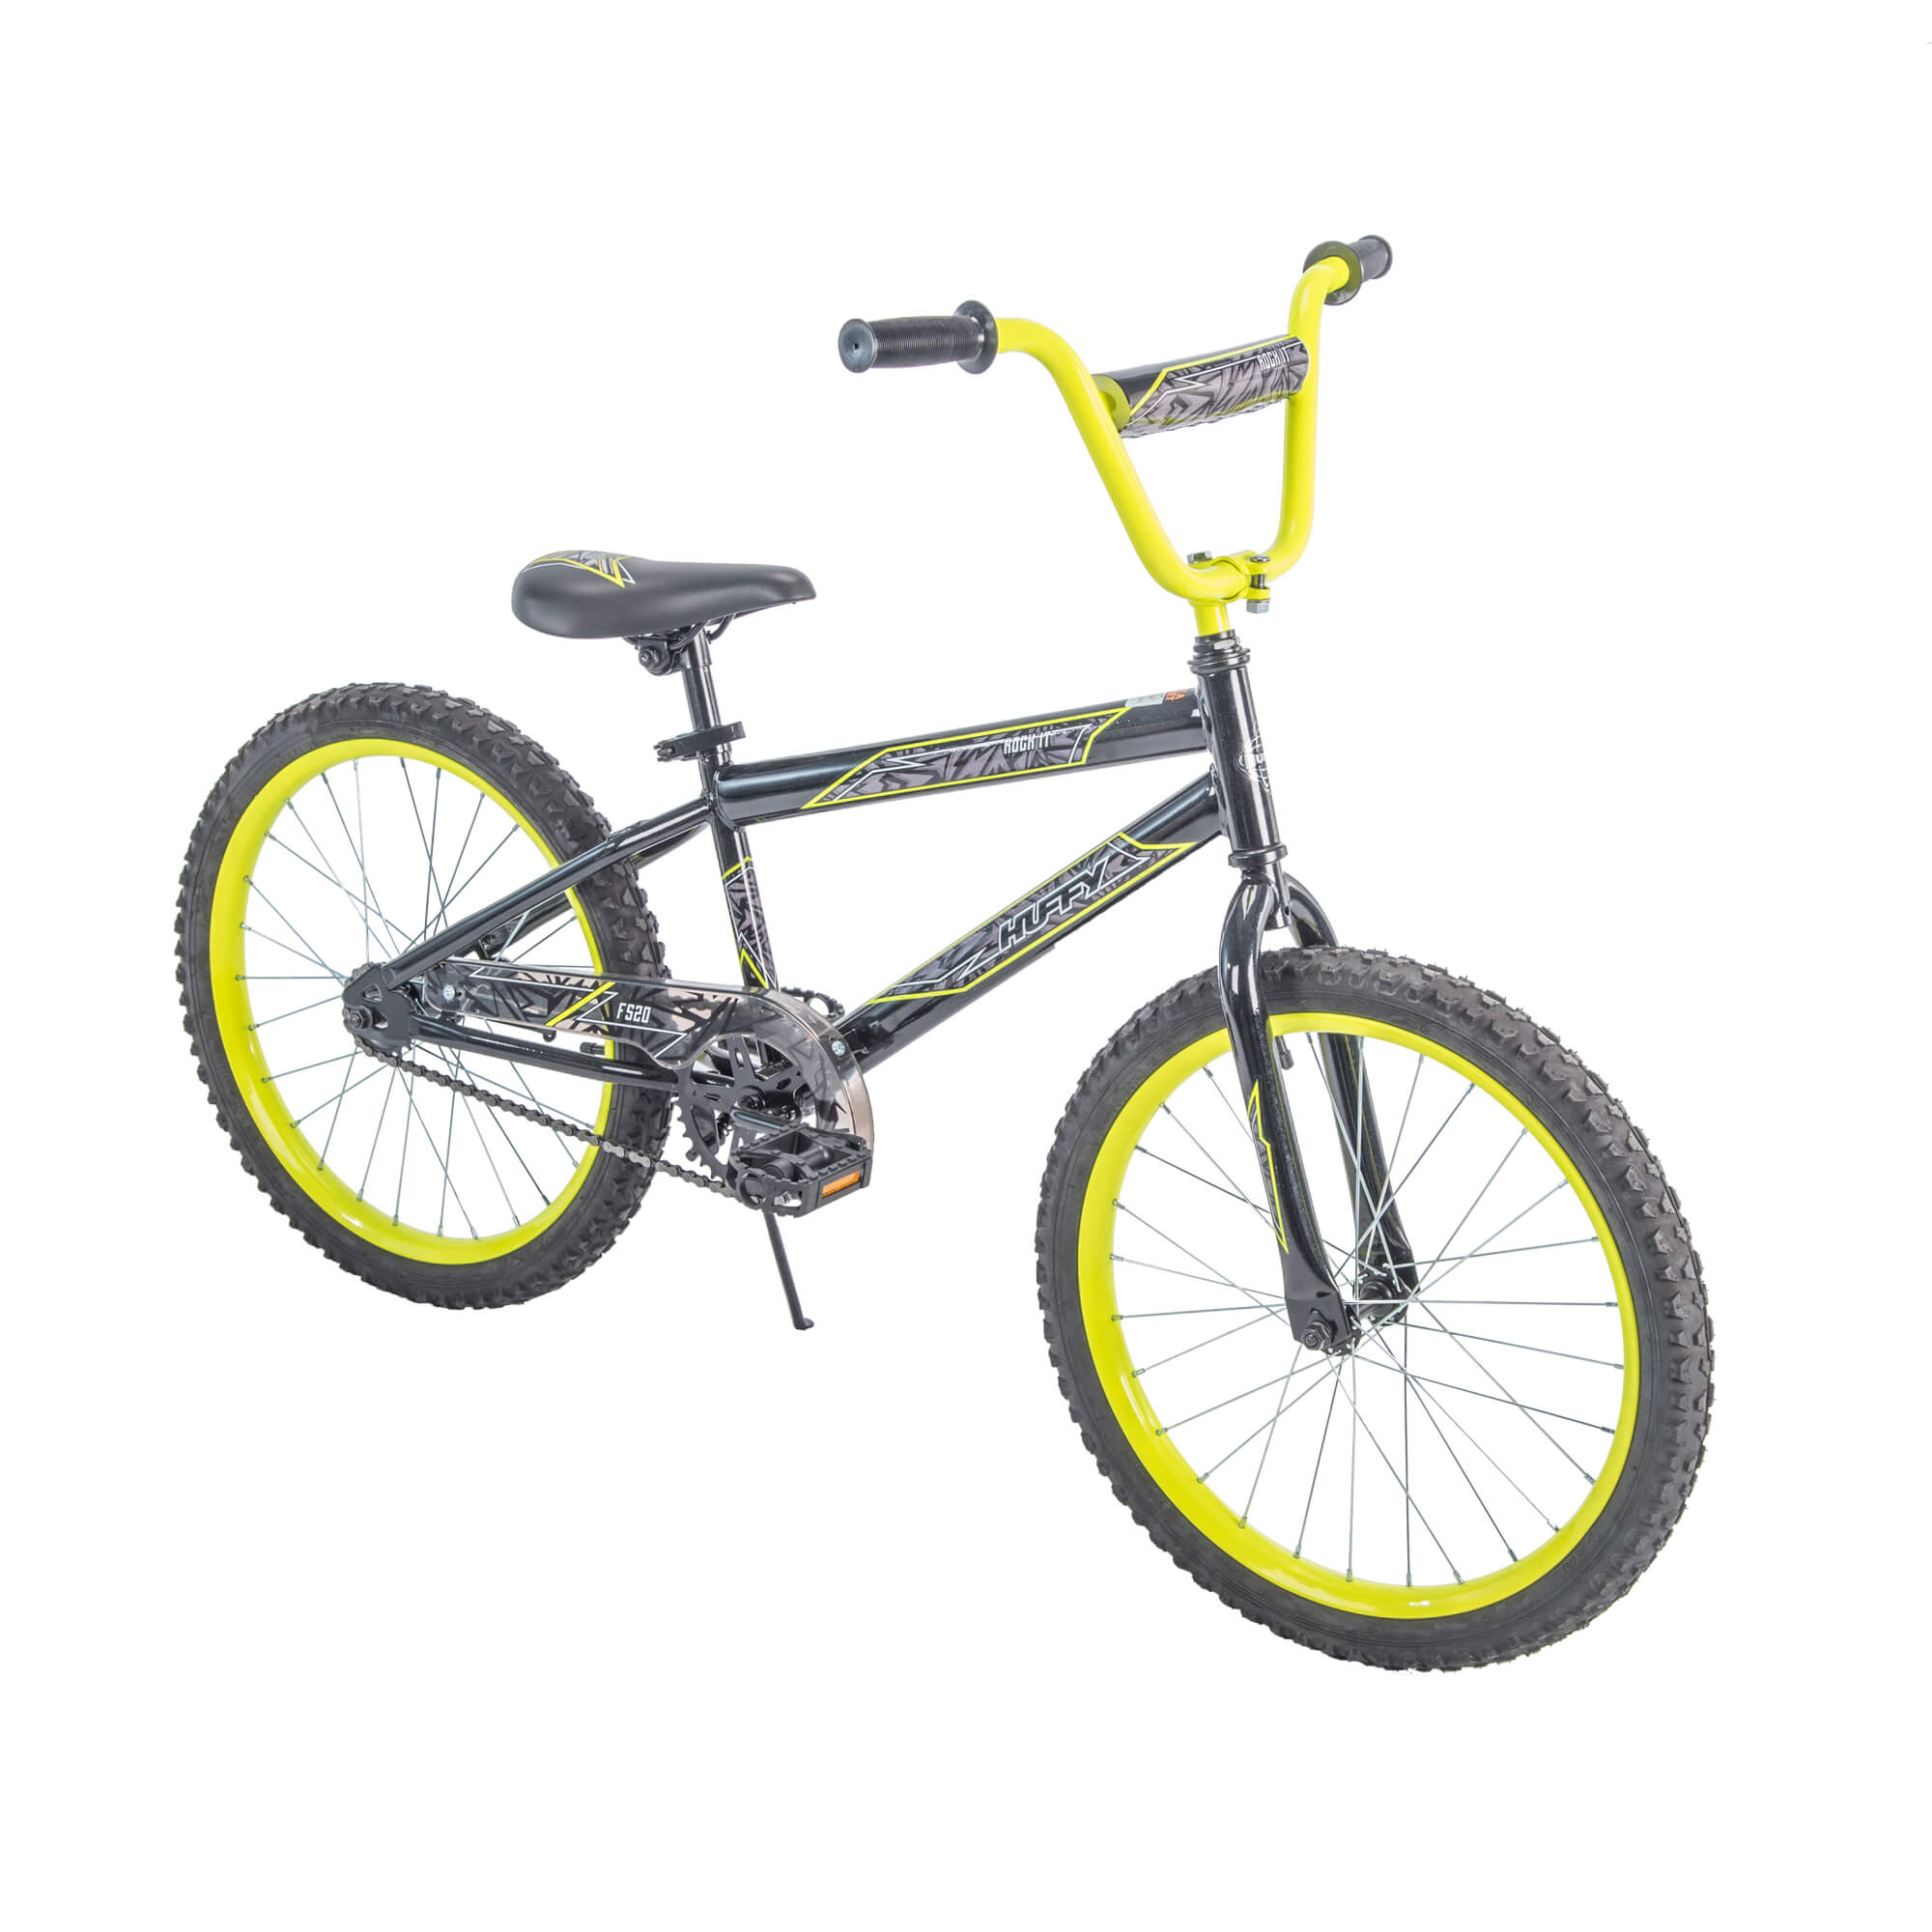 Huffy 20 In. Rock It Boys' Bike, Metallic Black with Neon Yellow Accents - image 1 of 5